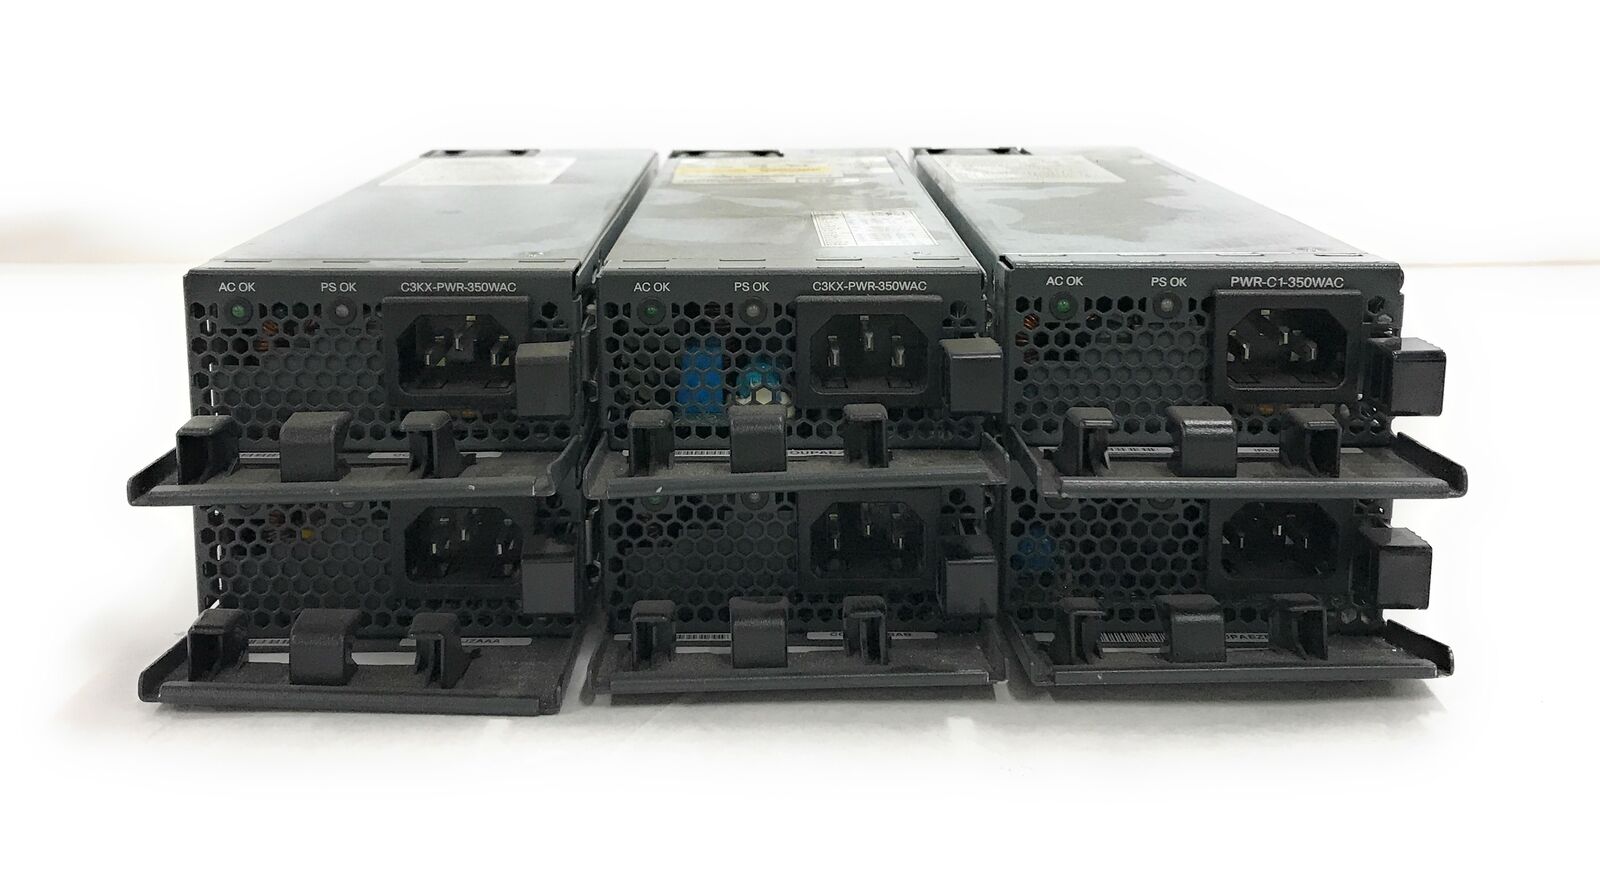 Lot of 6 Cisco PWR-C1-350WAV 350W Power Supplies for Catalyst 3850 Switch